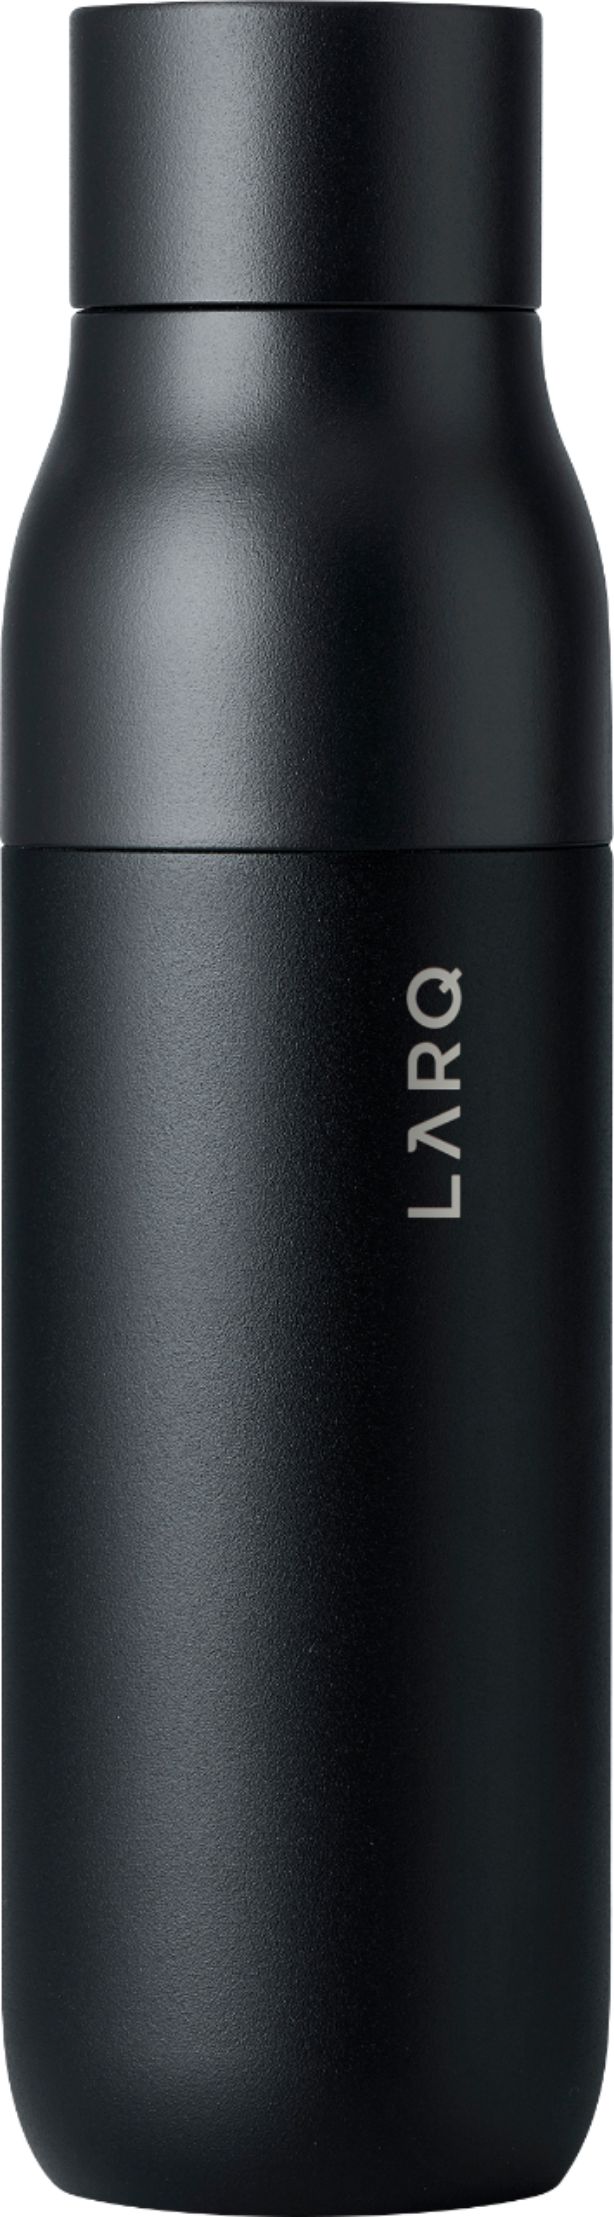 Angle View: LARQ - 17oz. Water Purification Thermal Bottle - Obsidian Black